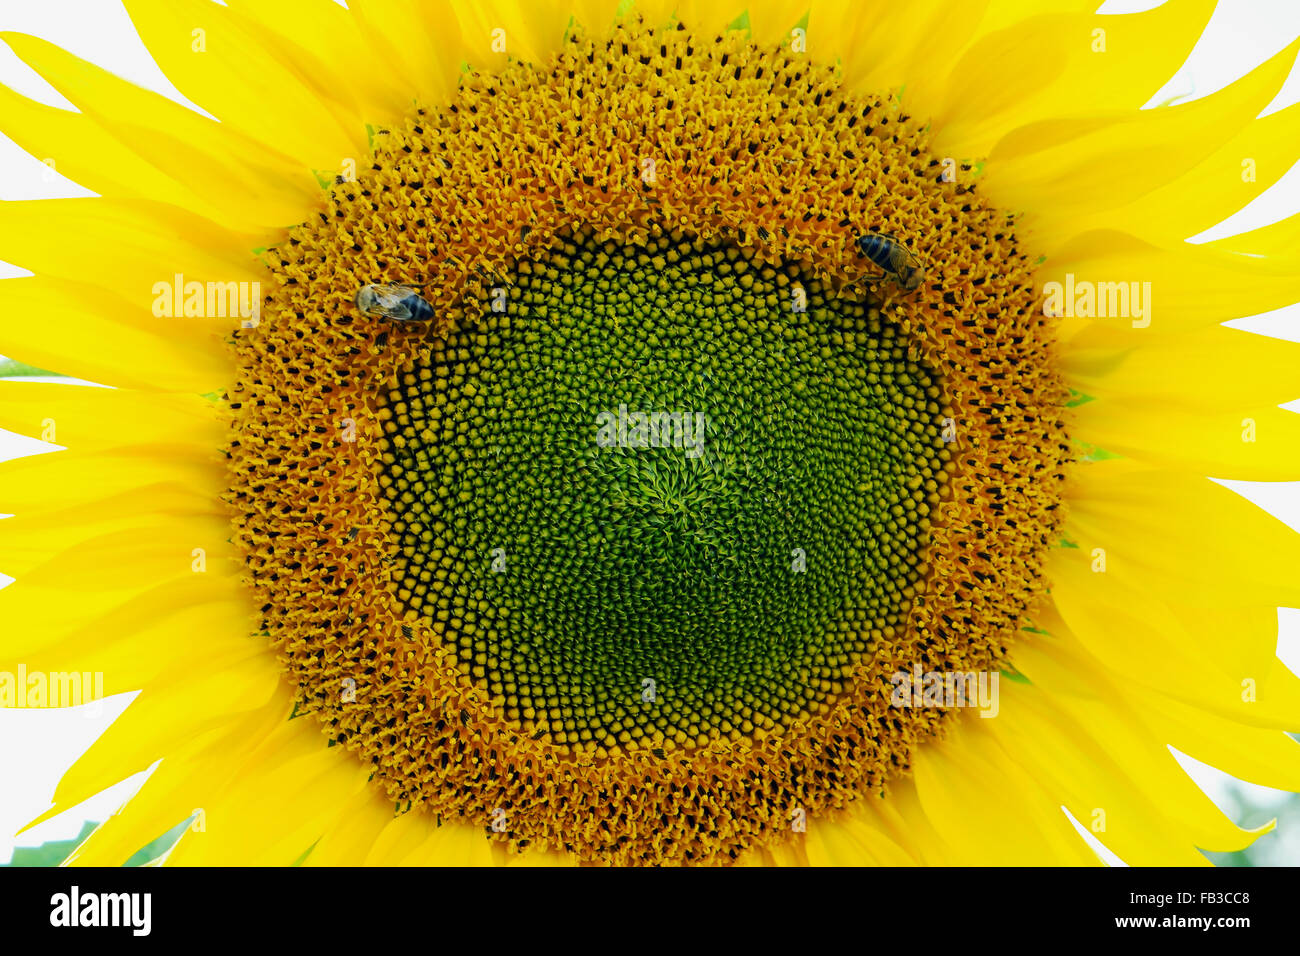 Two bees collect pollen on flowers of sunflower Stock Photo